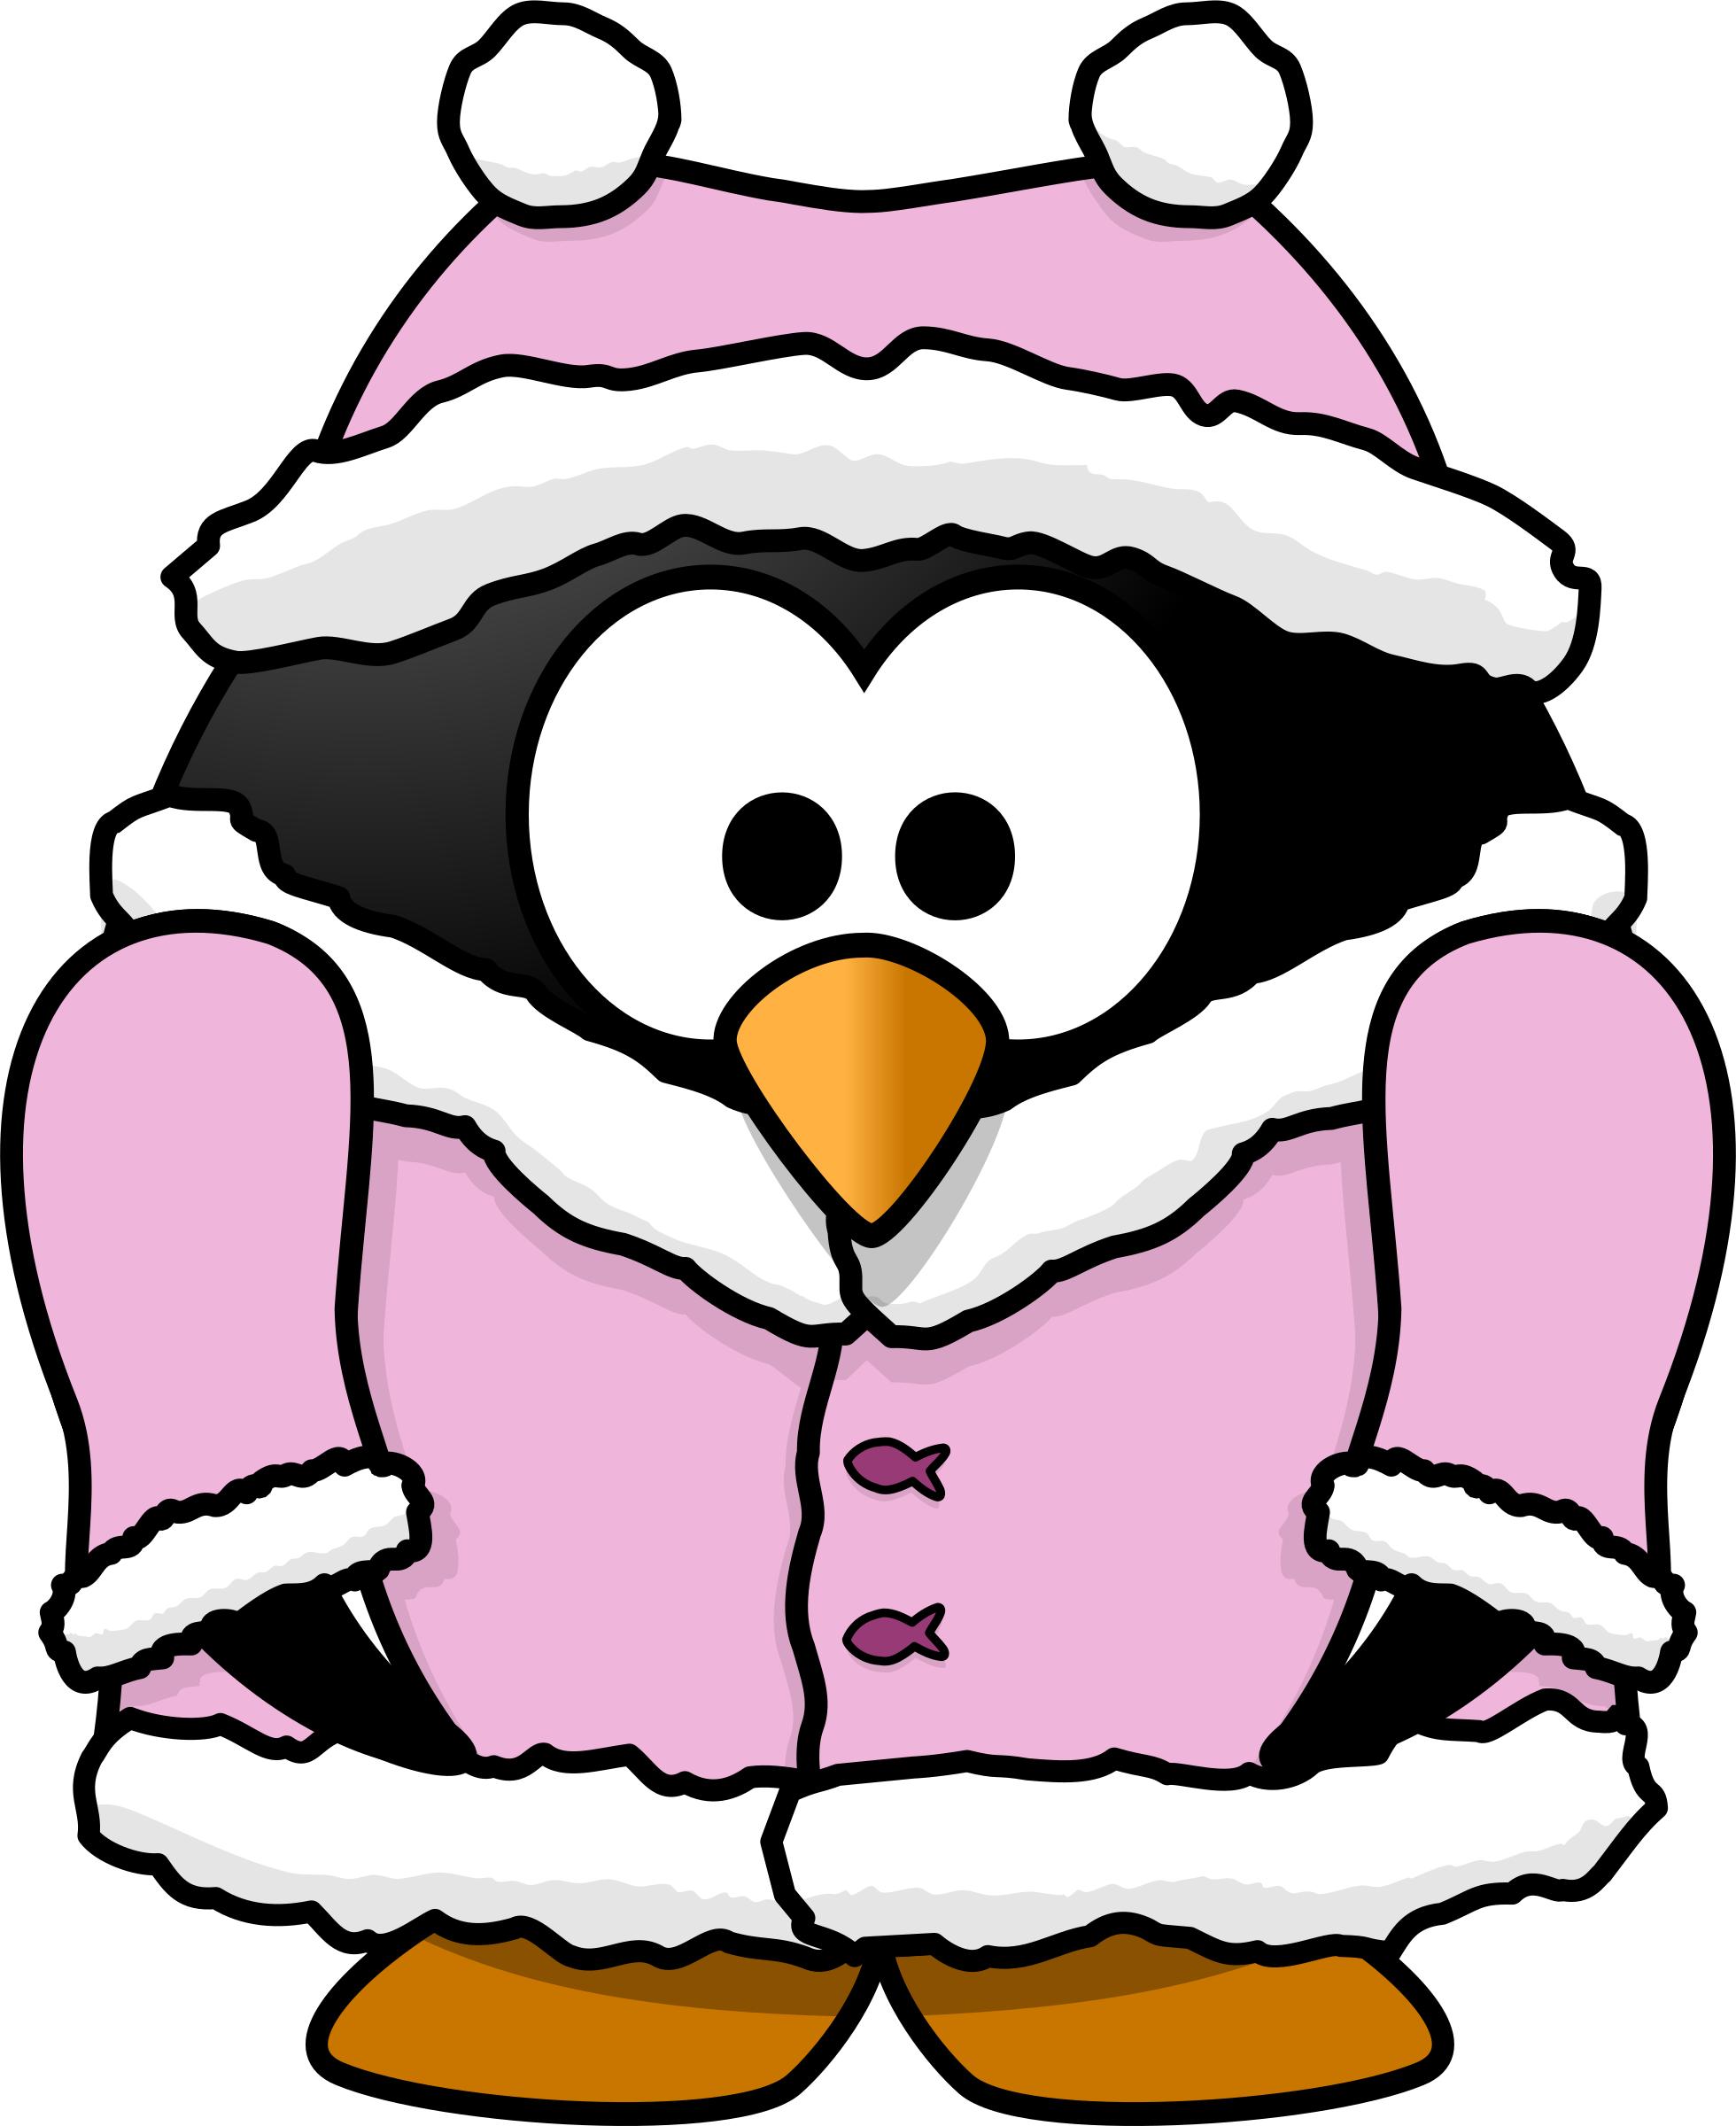 Penguin chick png